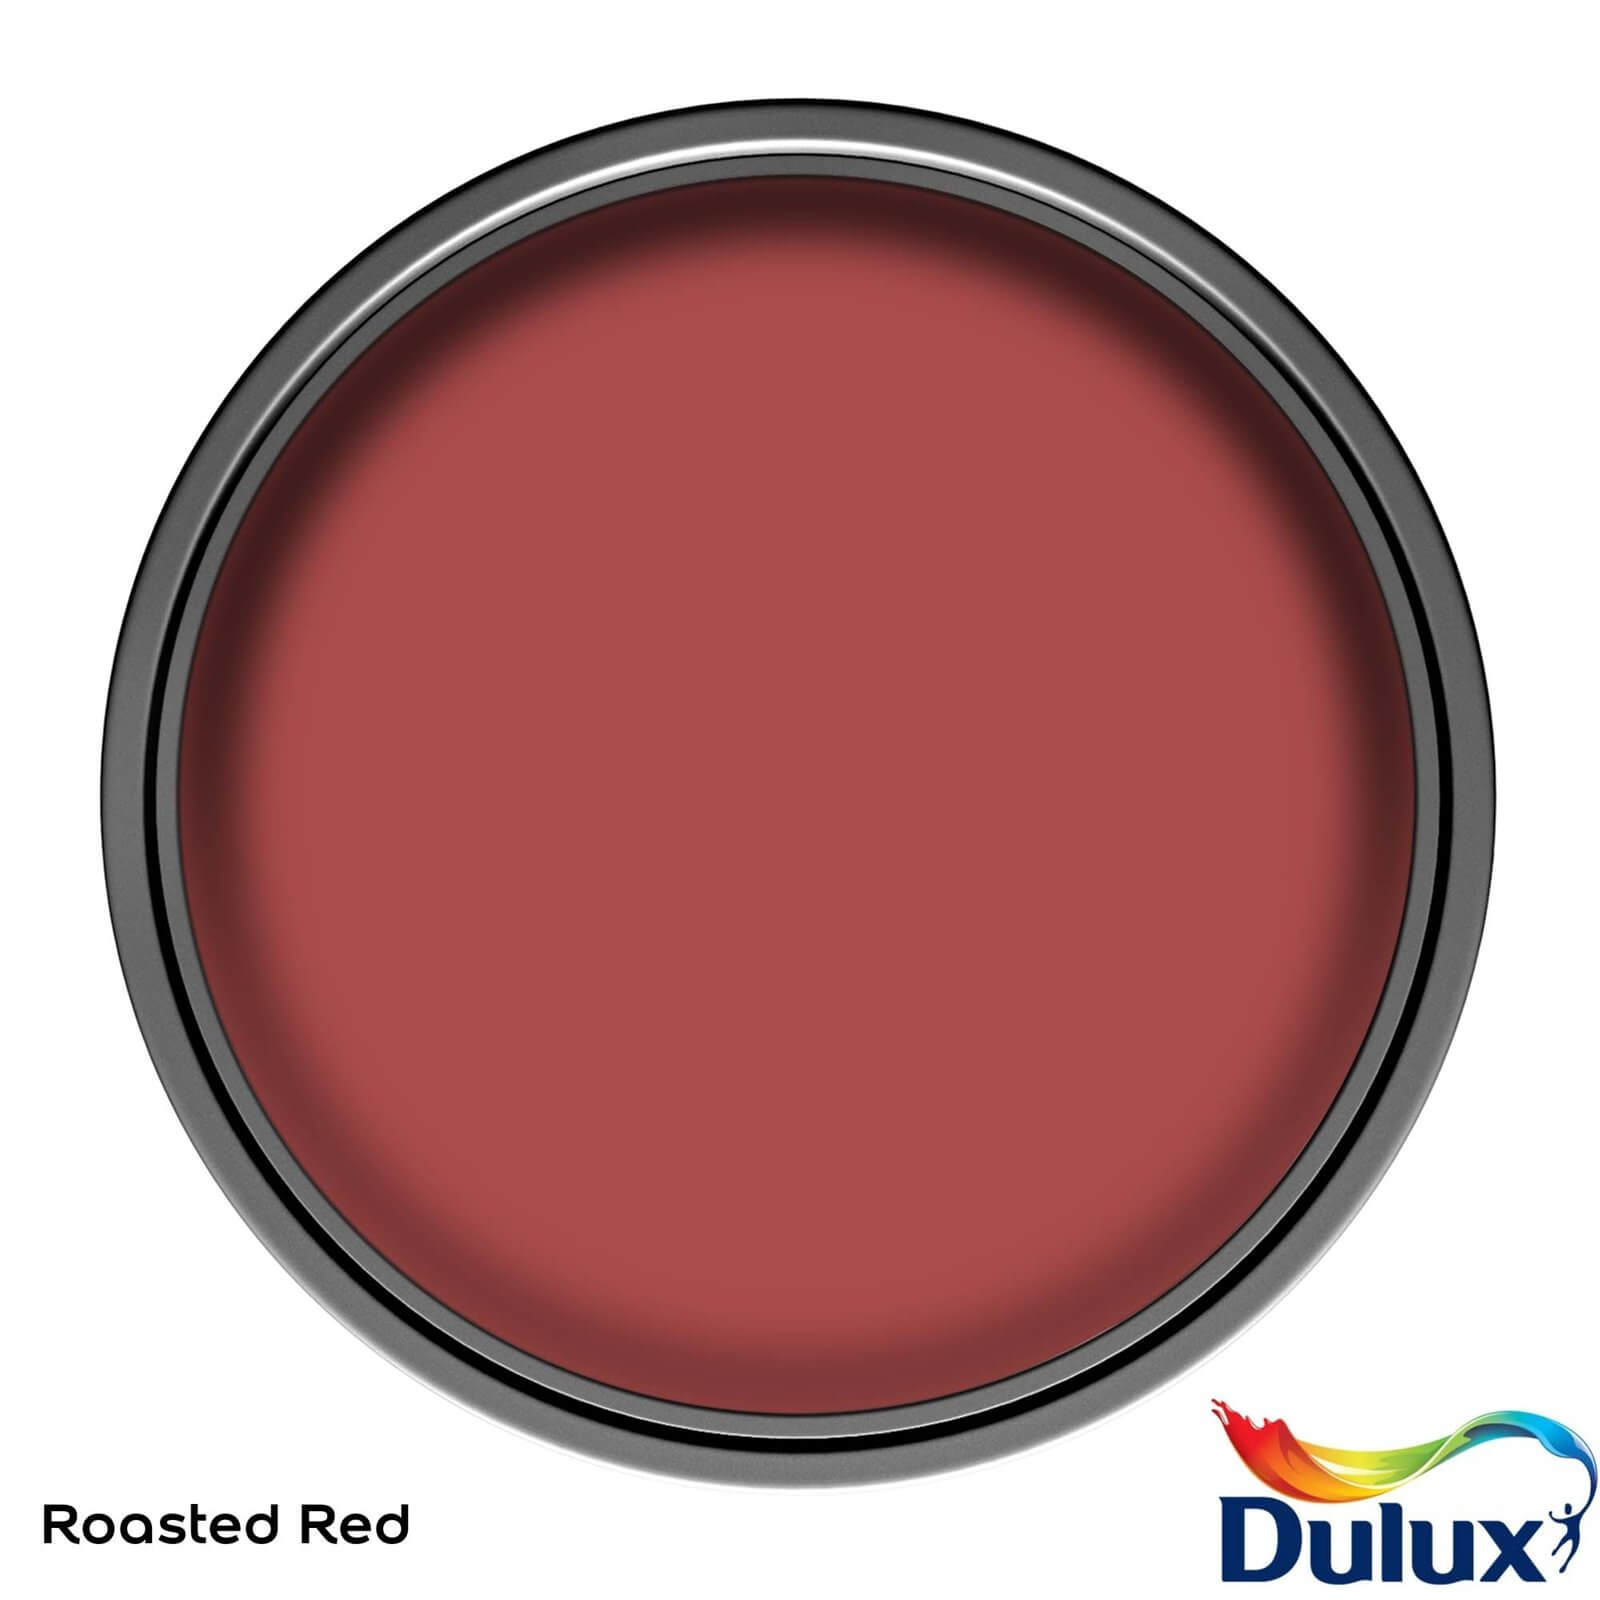 Dulux Once Roasted Red - Matt Emulsion Paint - 2.5L